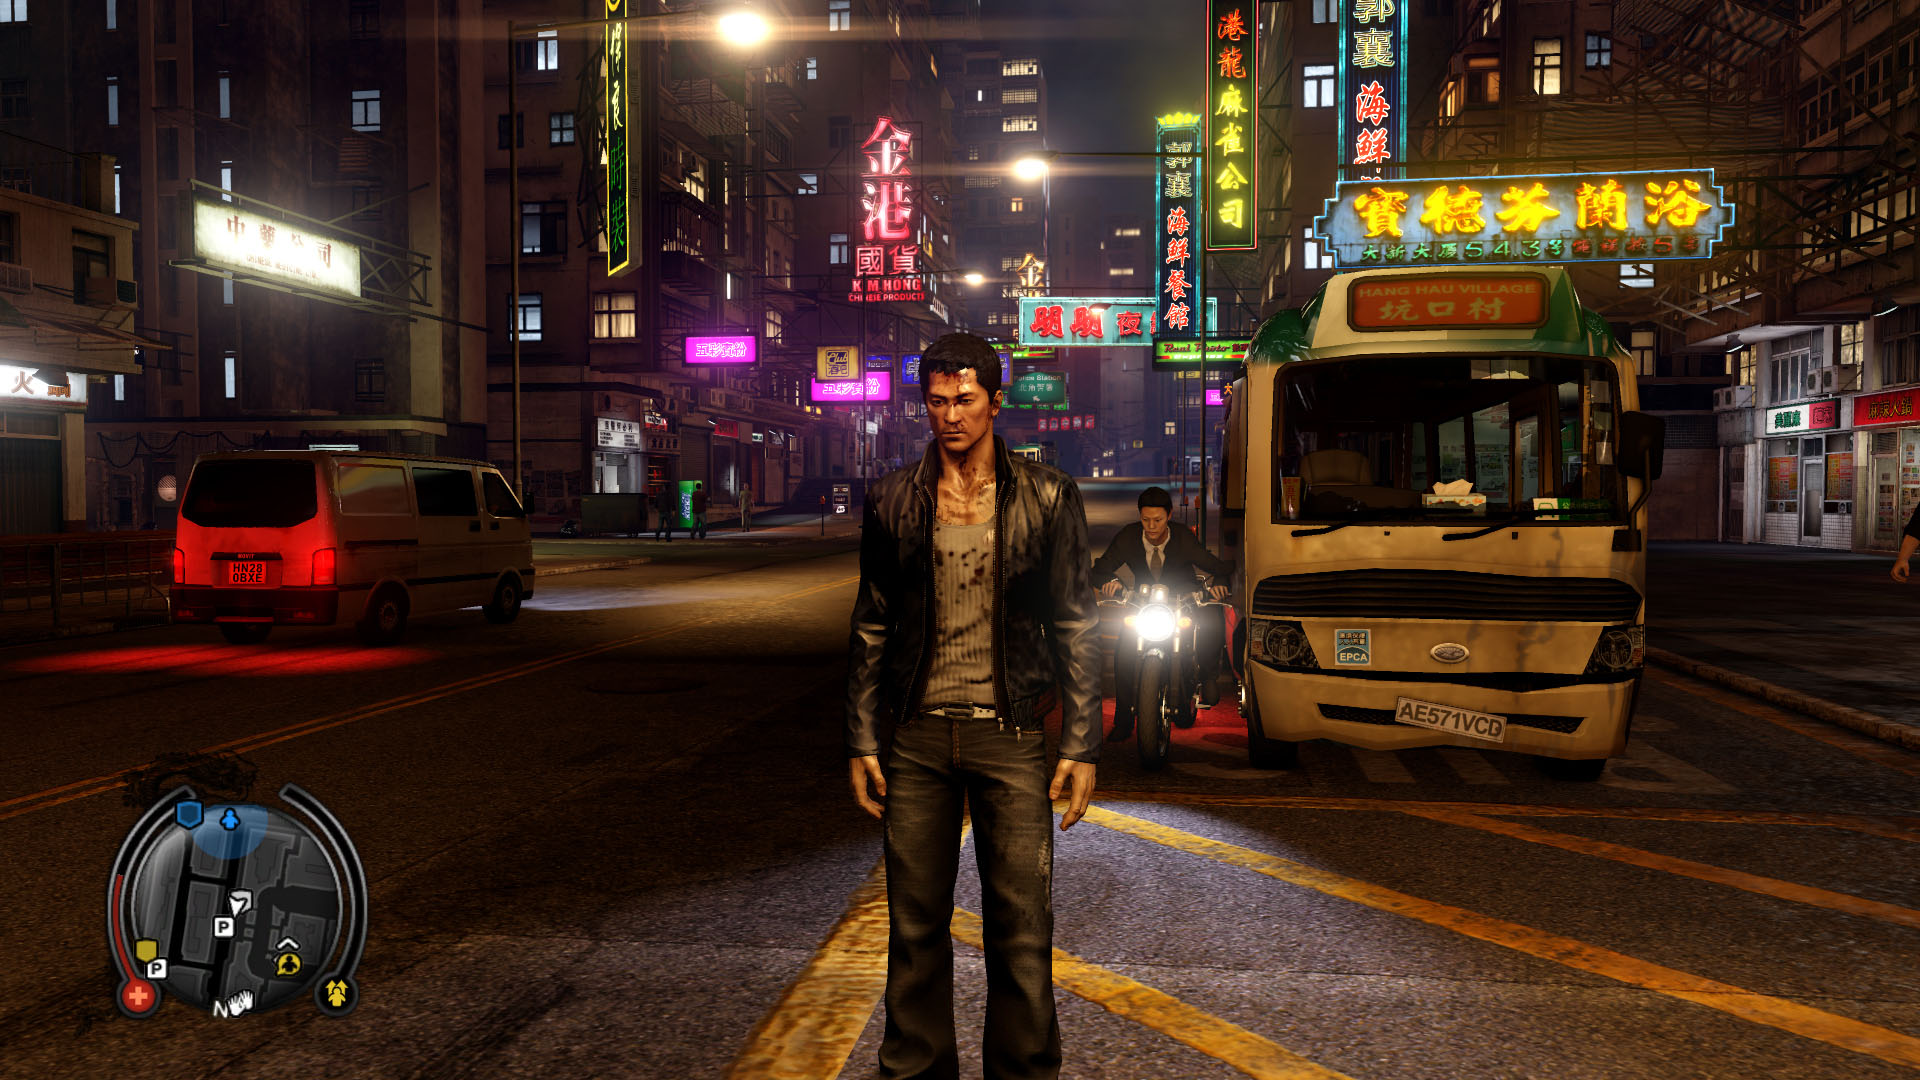 Hd texture pack for sleeping dogs free